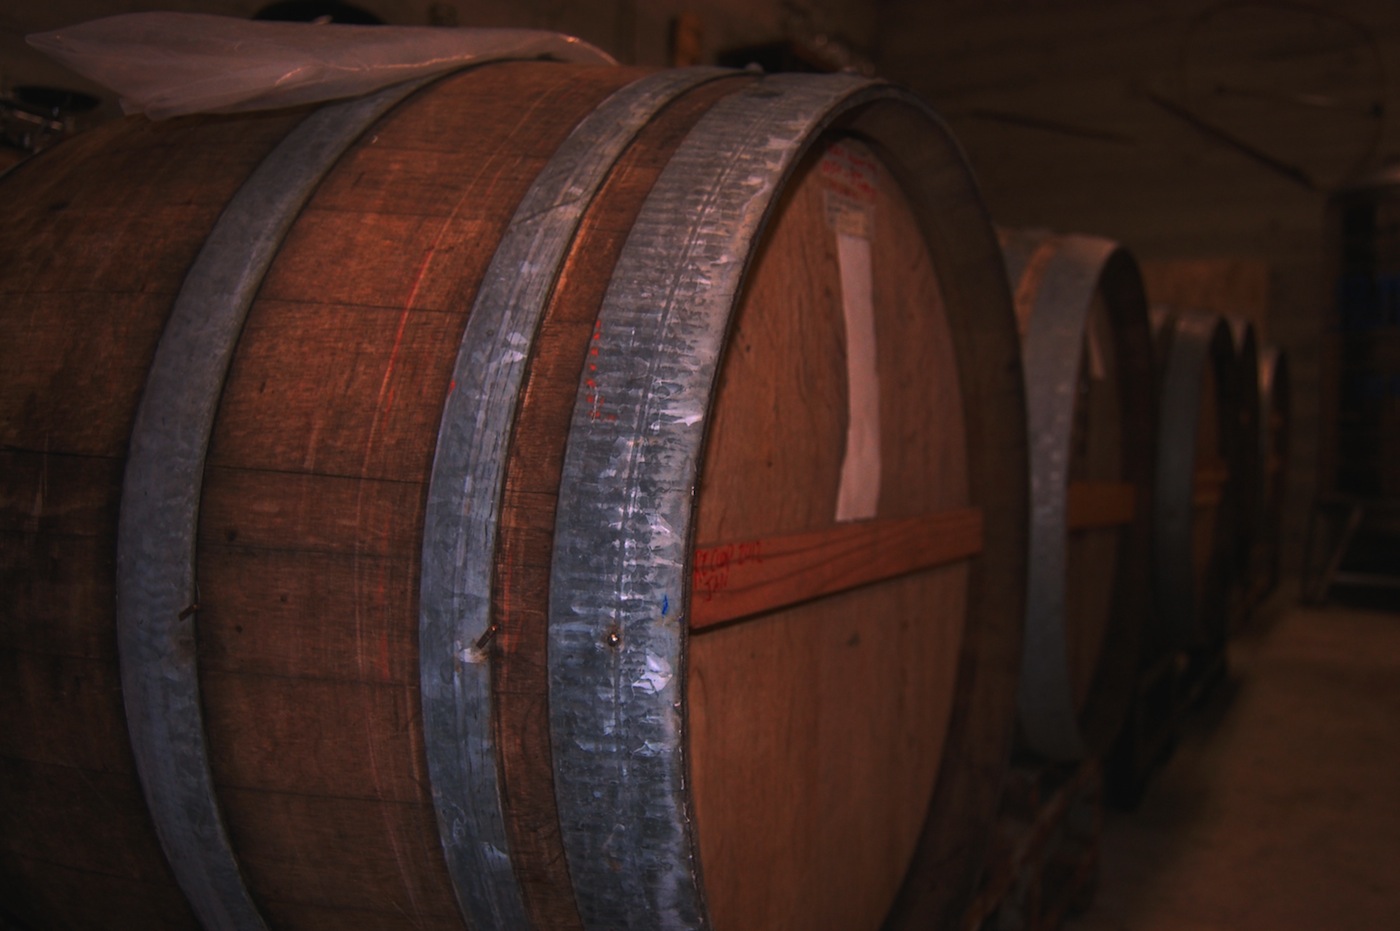 Close-up view of large wooden barrels with metal hoops, stored in a dimly lit cellar.